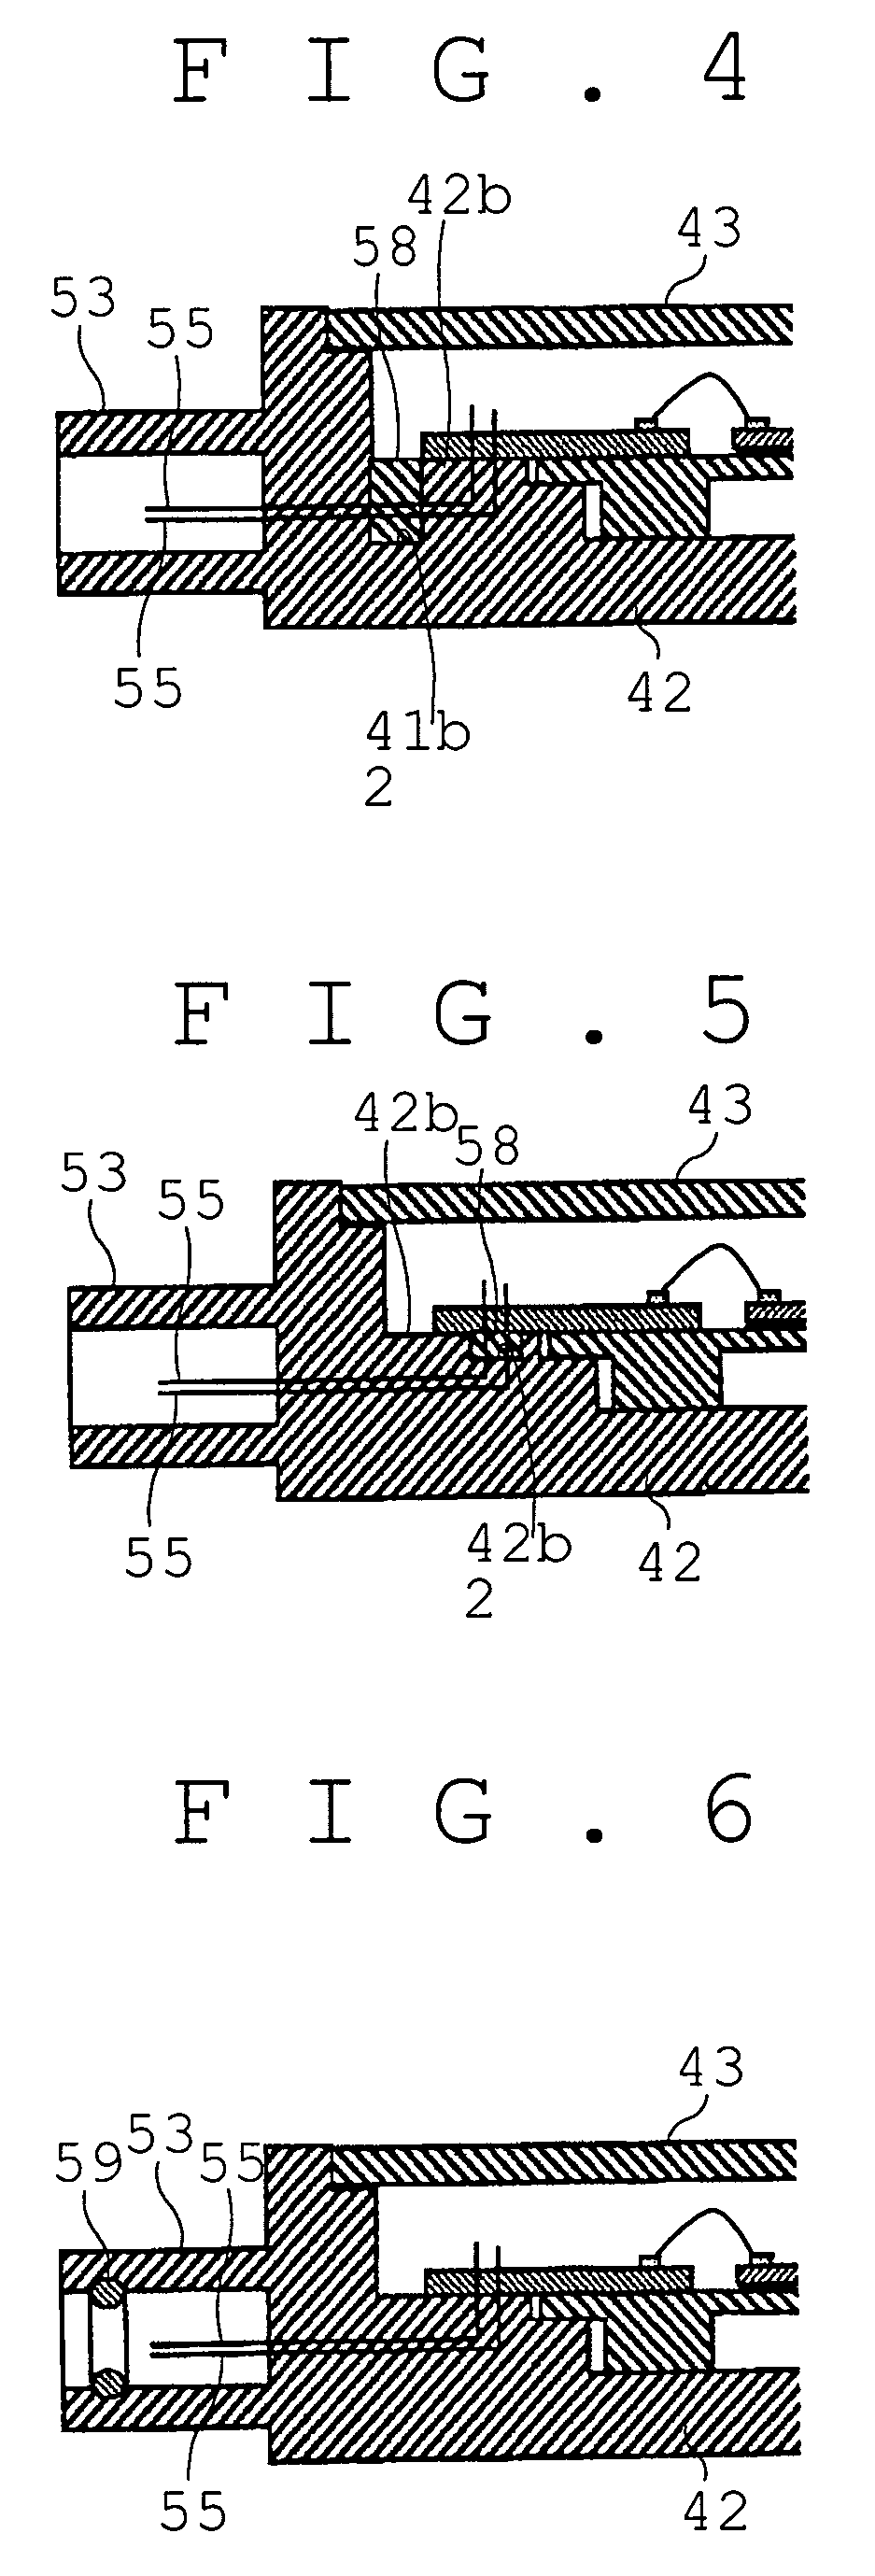 Automatic transmission electronic control device